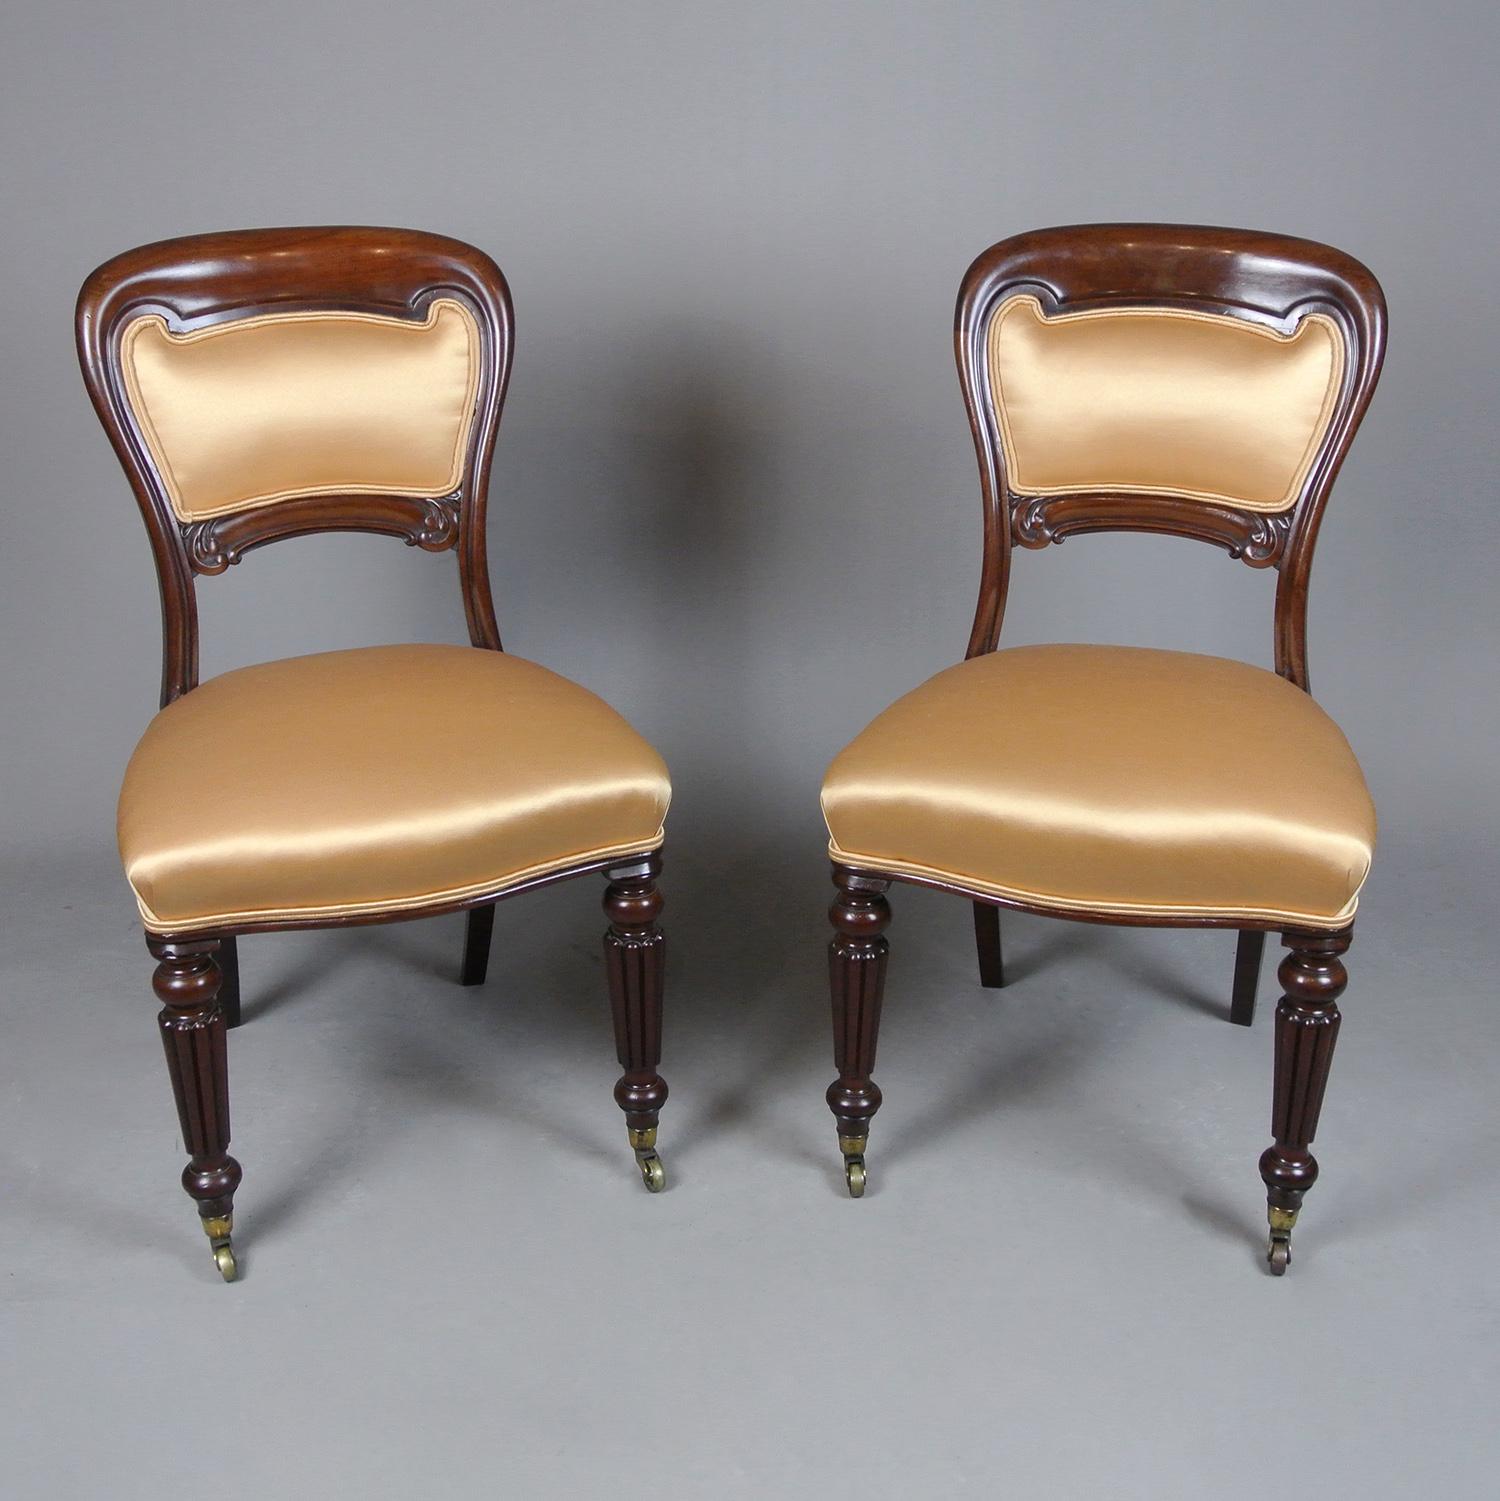 Mahogany Pair of Early 19th Century ‘Gillows of London’ Parlour Chairs c. 1830